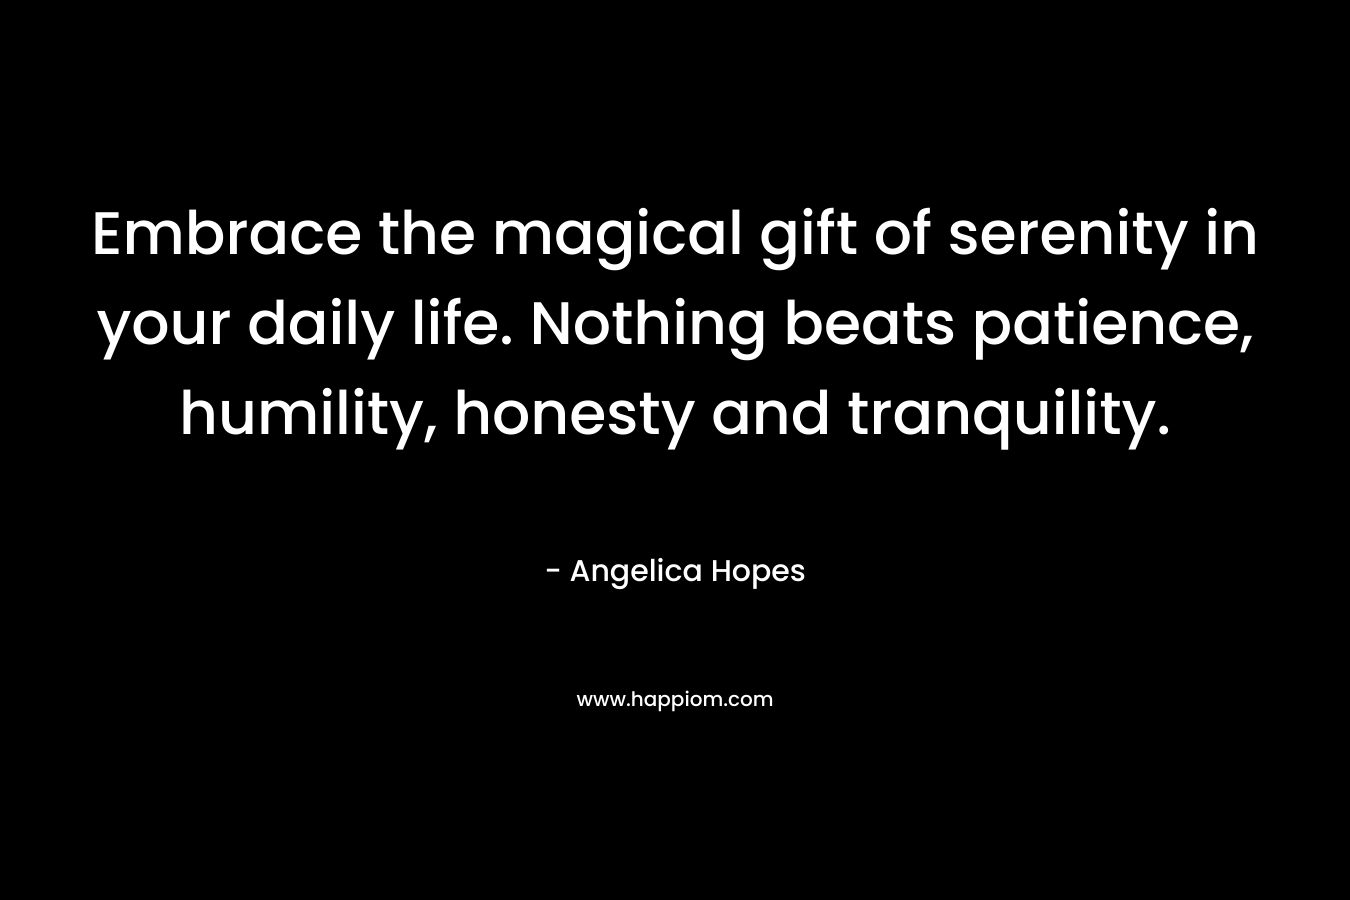 Embrace the magical gift of serenity in your daily life. Nothing beats patience, humility, honesty and tranquility. – Angelica Hopes